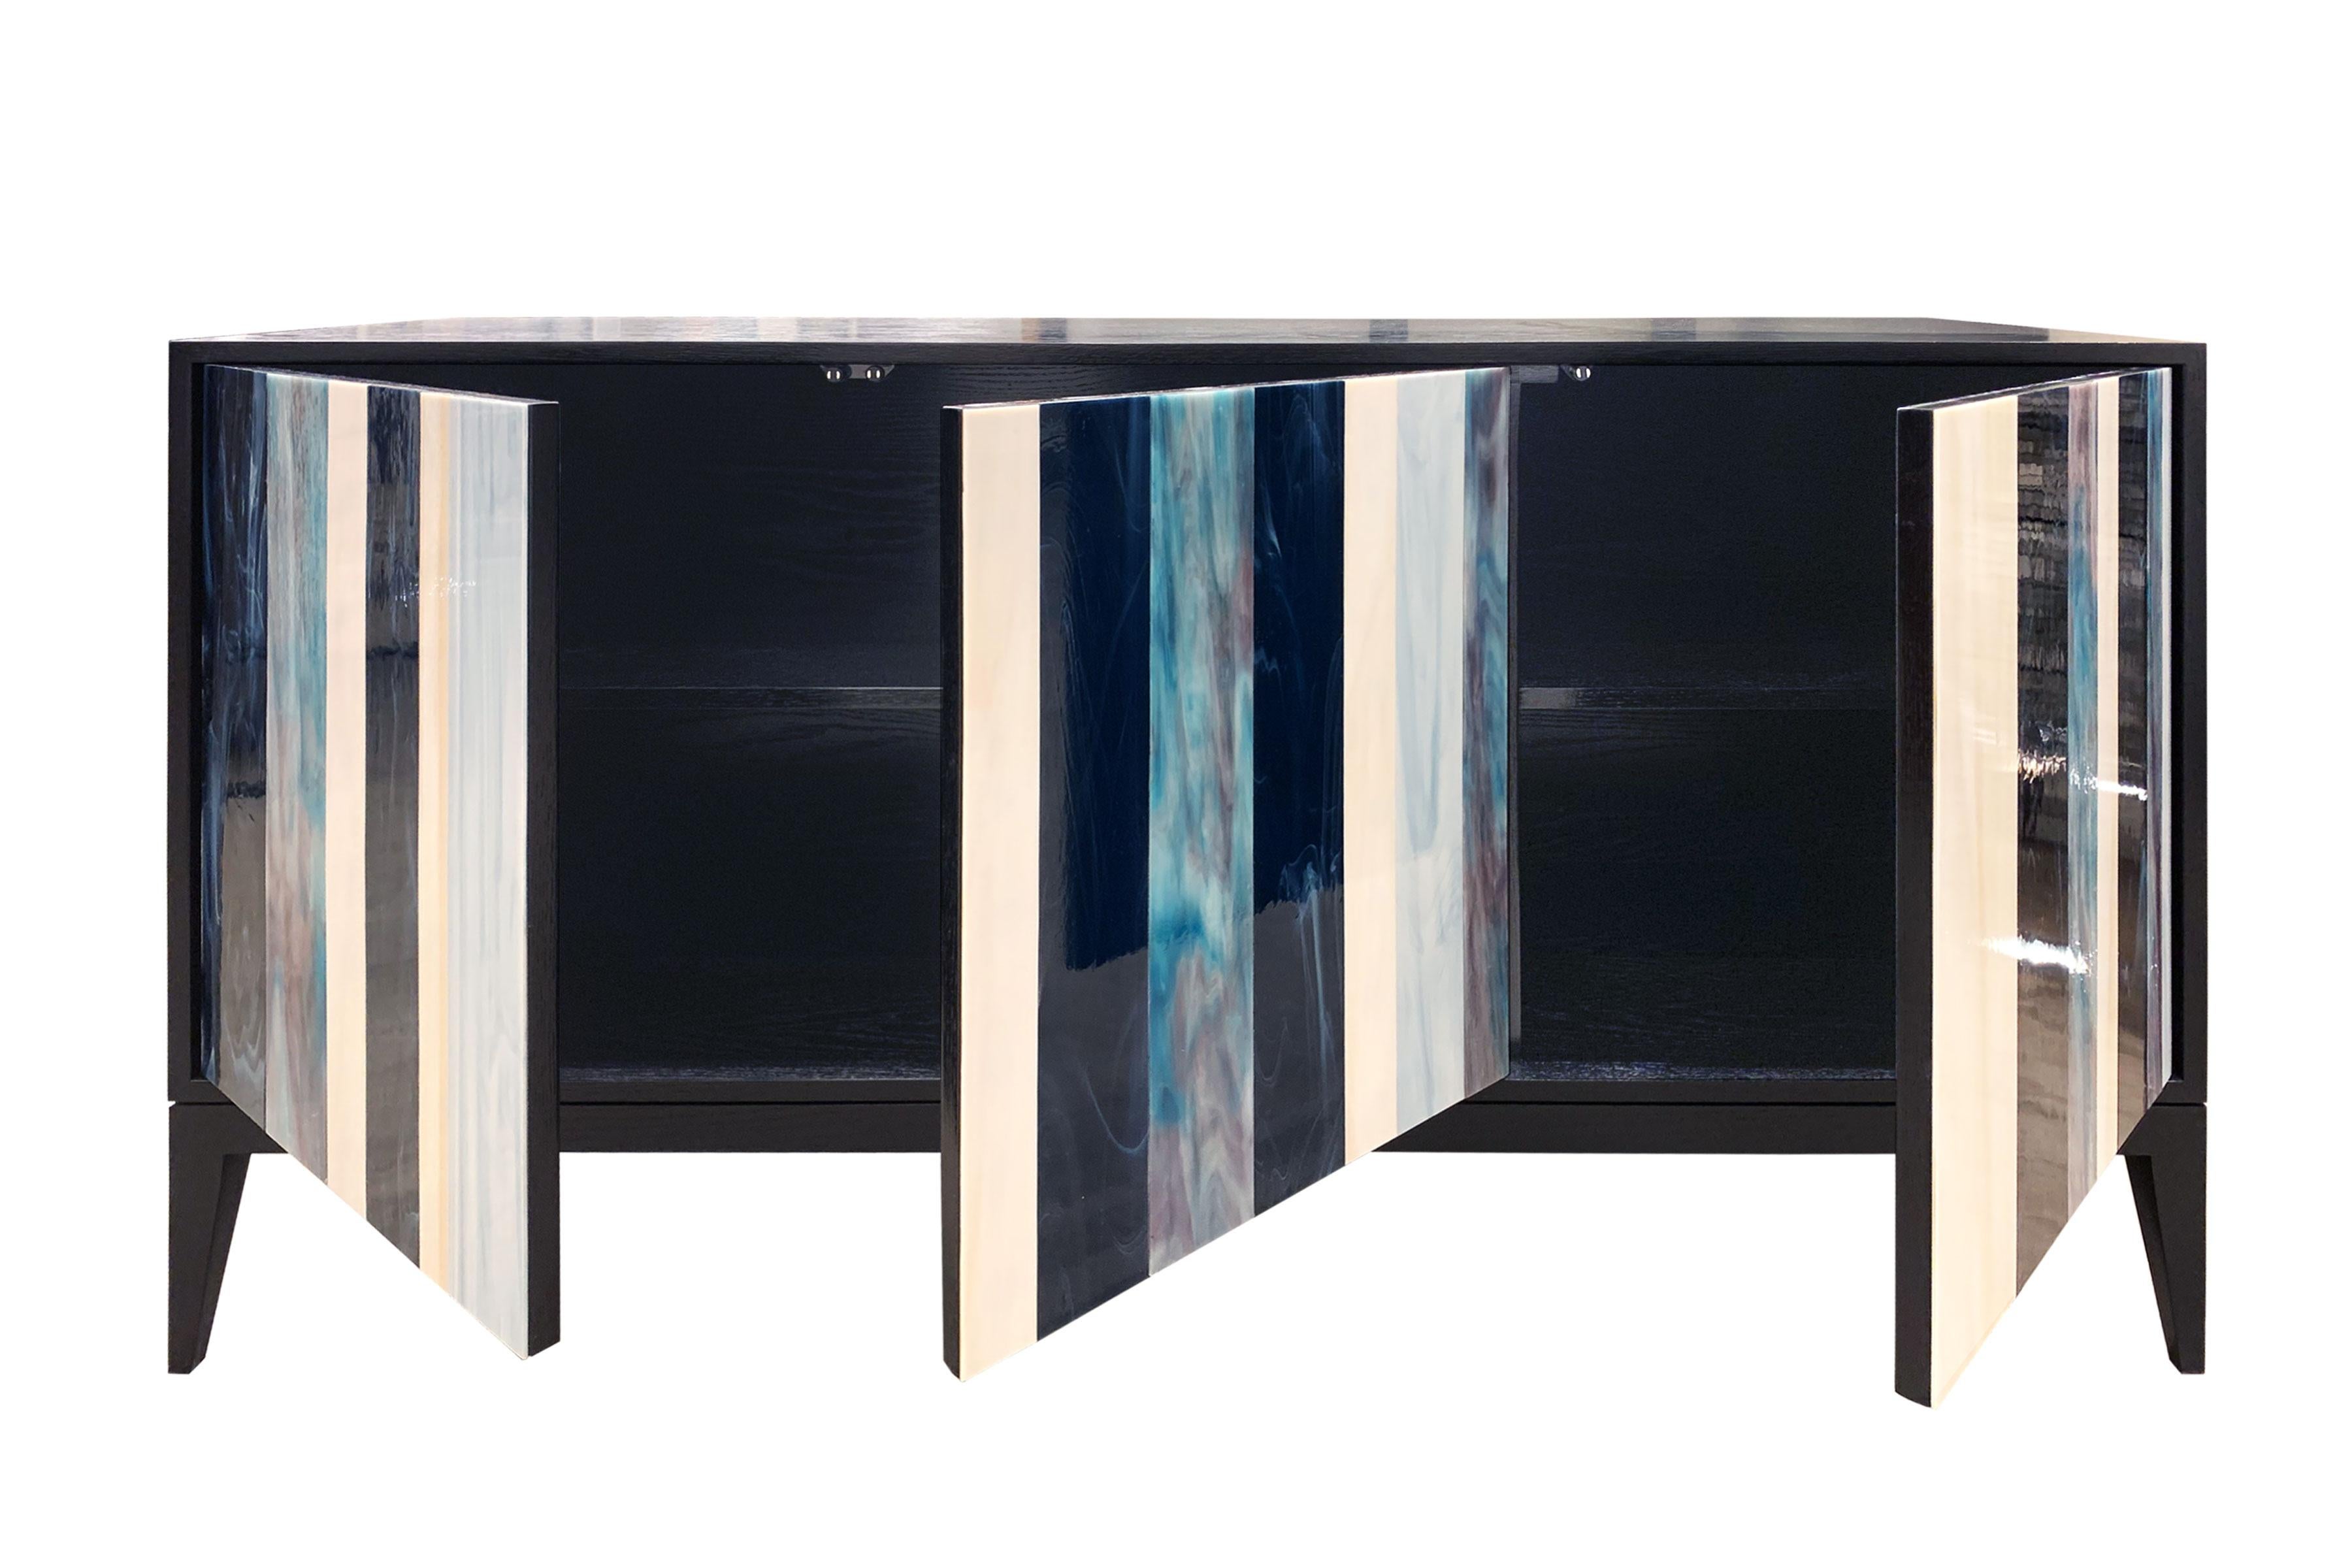 The Milano Linea buffet by Ercole home has a 3-door front, with black stain finish on oak.
Handcut glass stripes in Ivory, French Blue, Electric Blue, and Cloudy Notte decorate the surface of doors.
There is one adjustable interior shelf in each